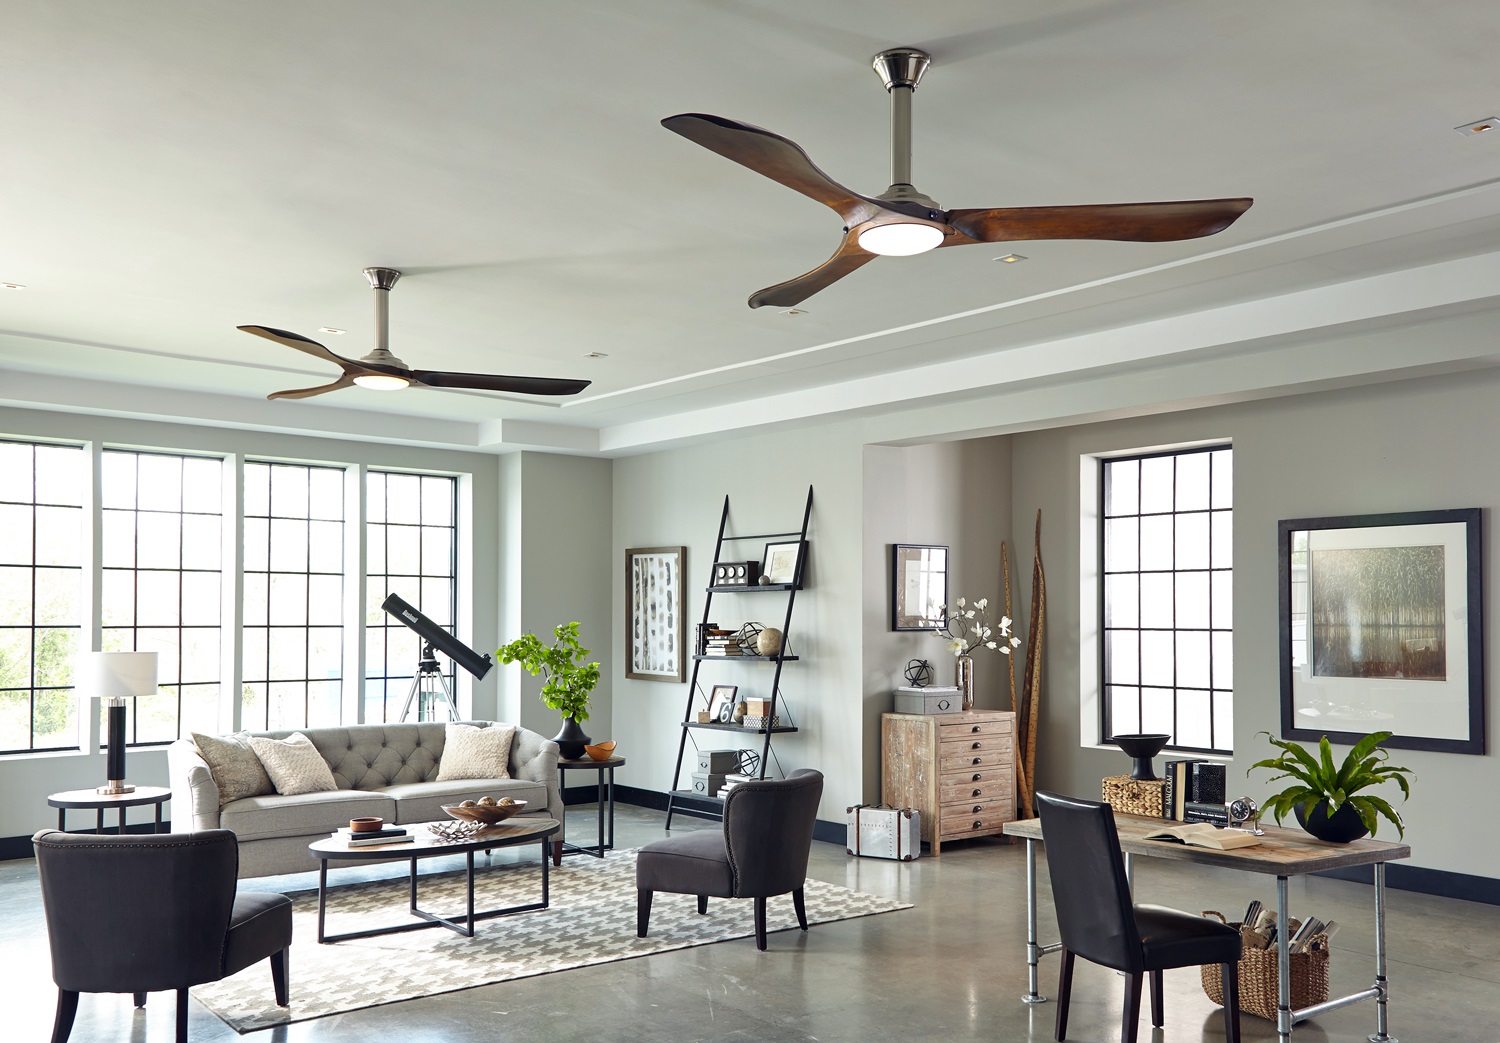 Ceiling Fans vs. Air Conditioners: The Cost-Efficient Choice